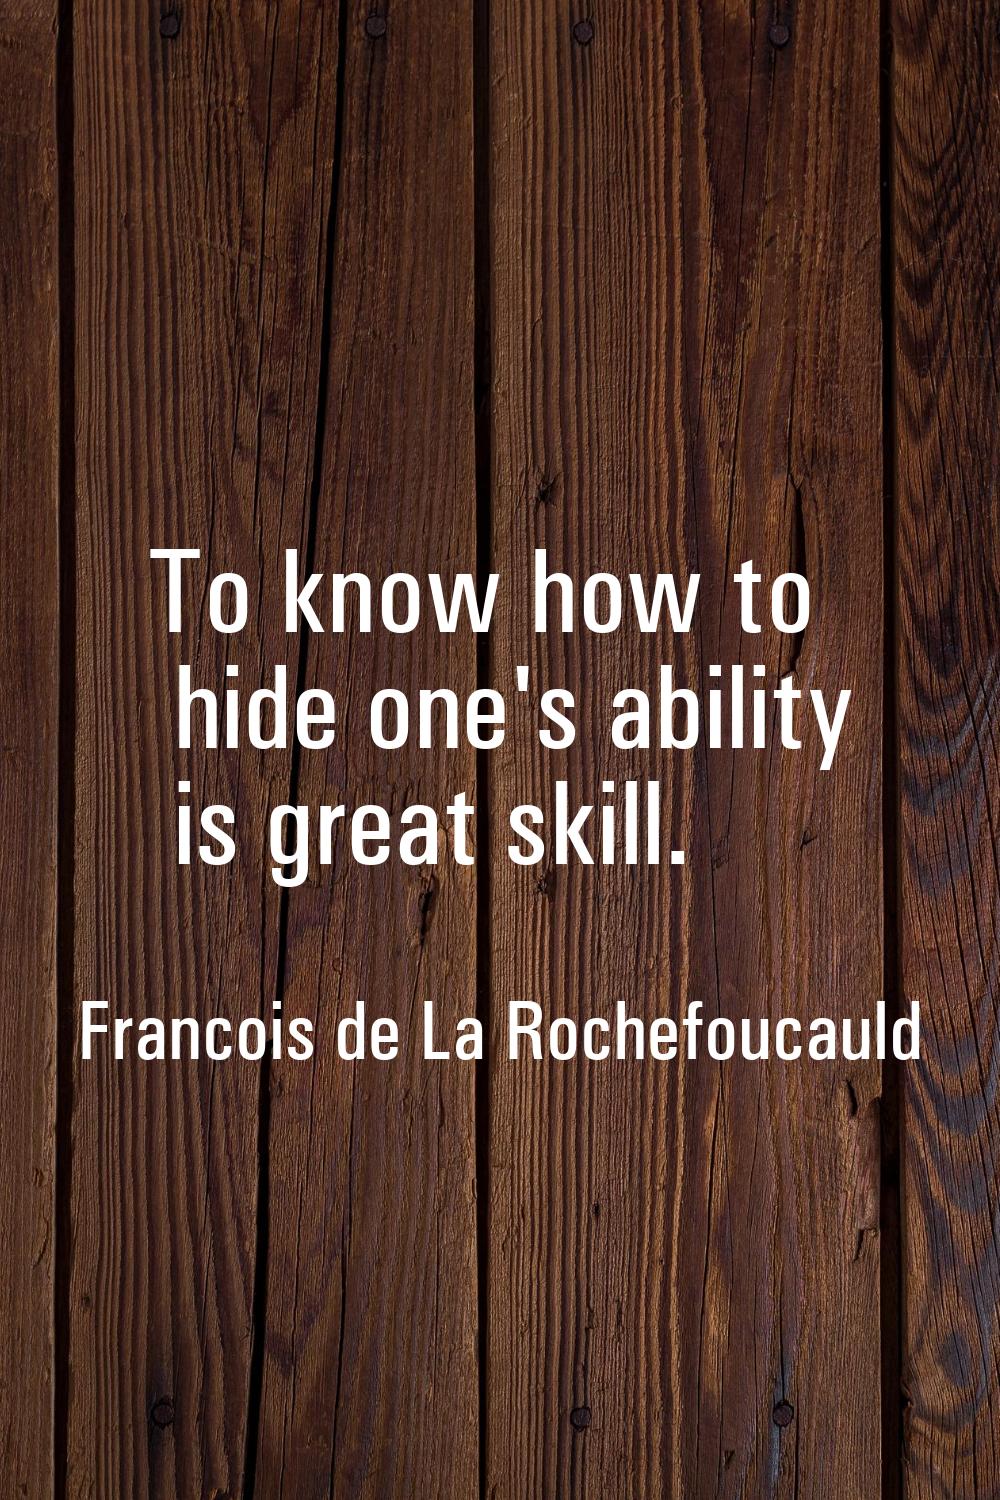 To know how to hide one's ability is great skill.